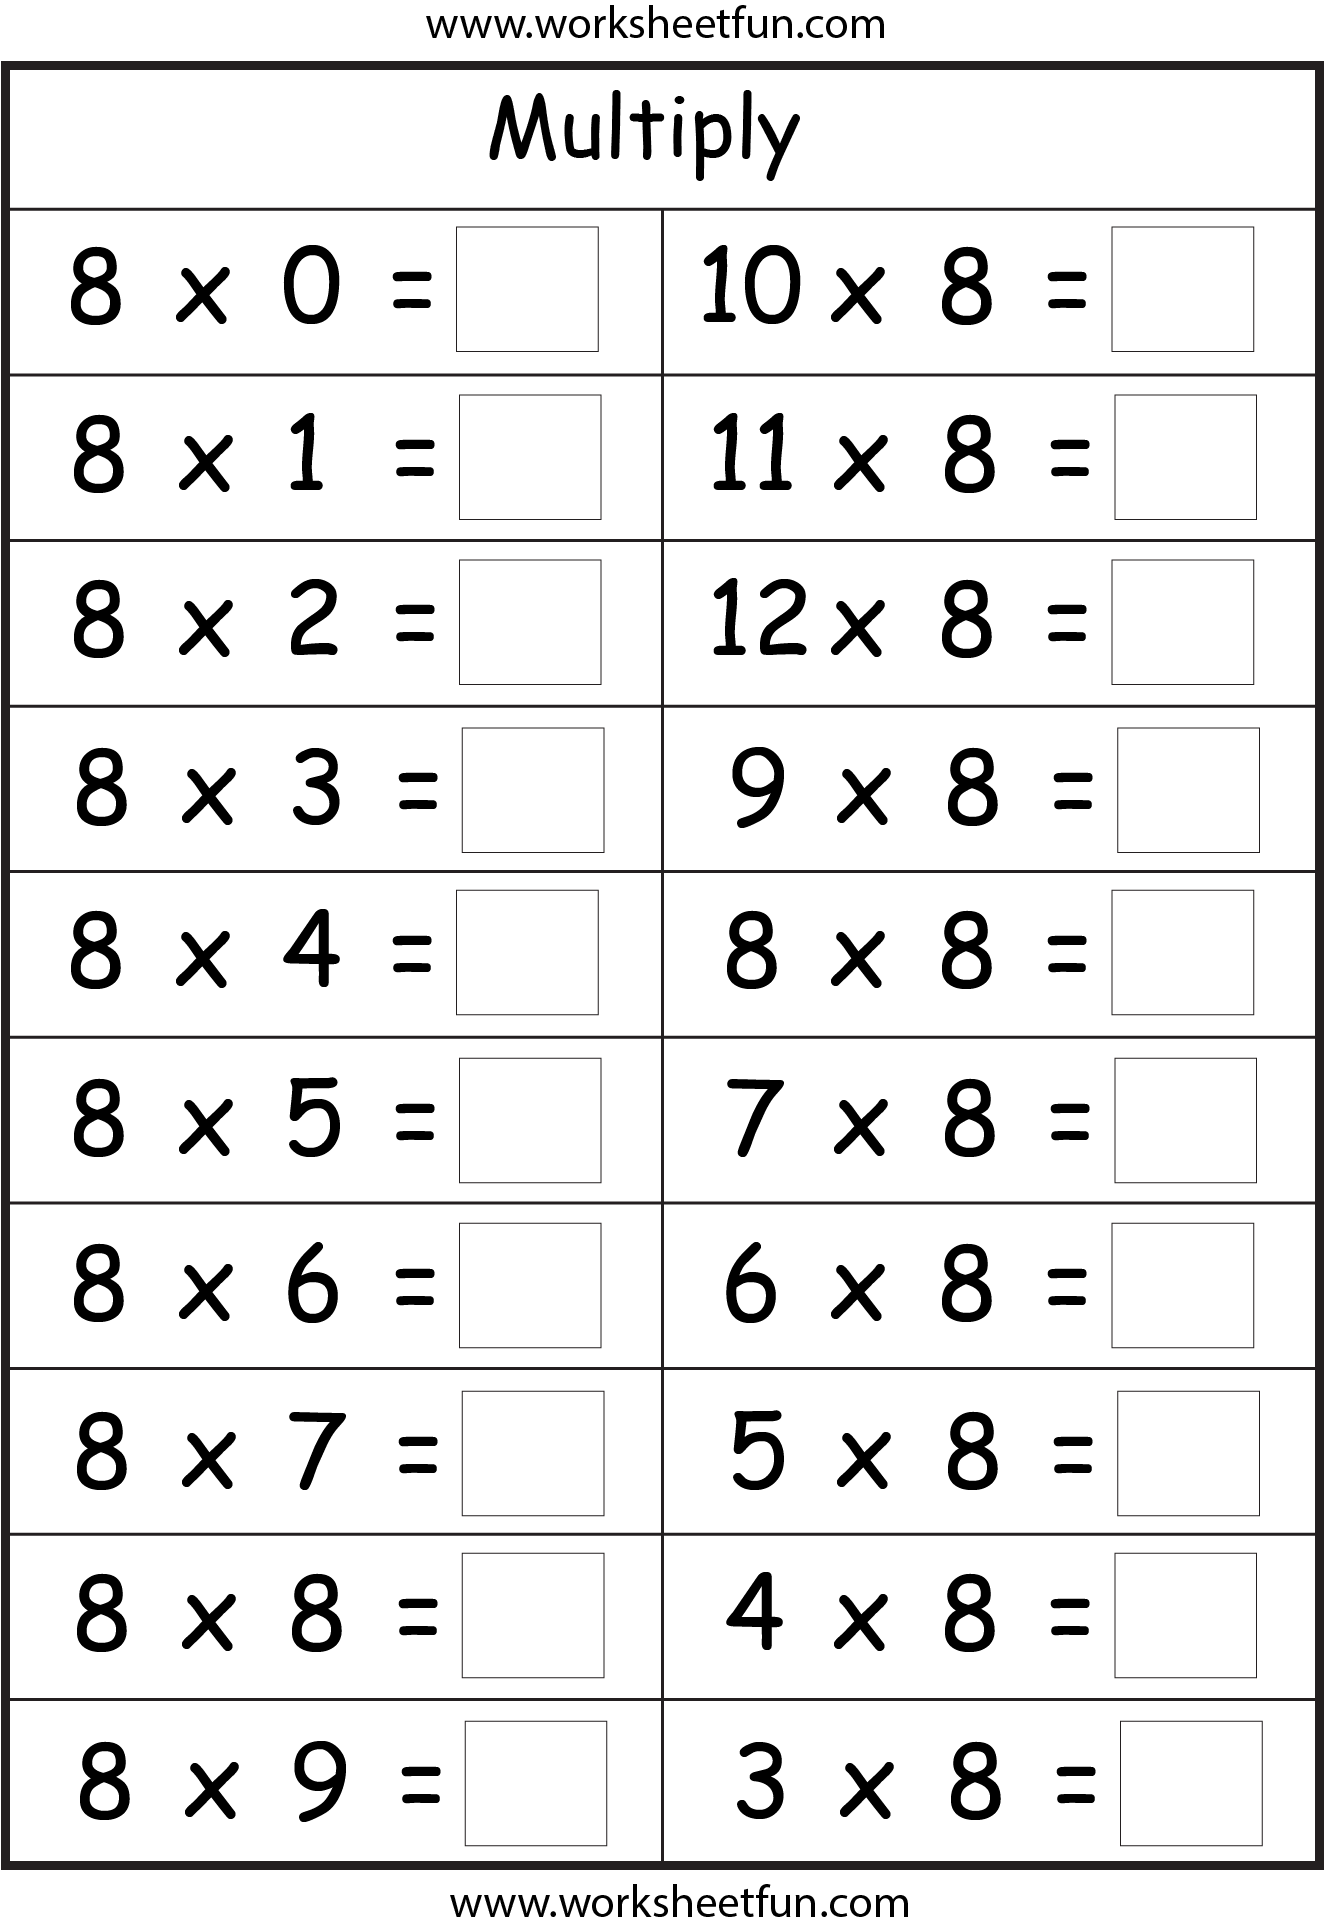 8-times-table-worksheets-pdf-multiplying-by-8-activities